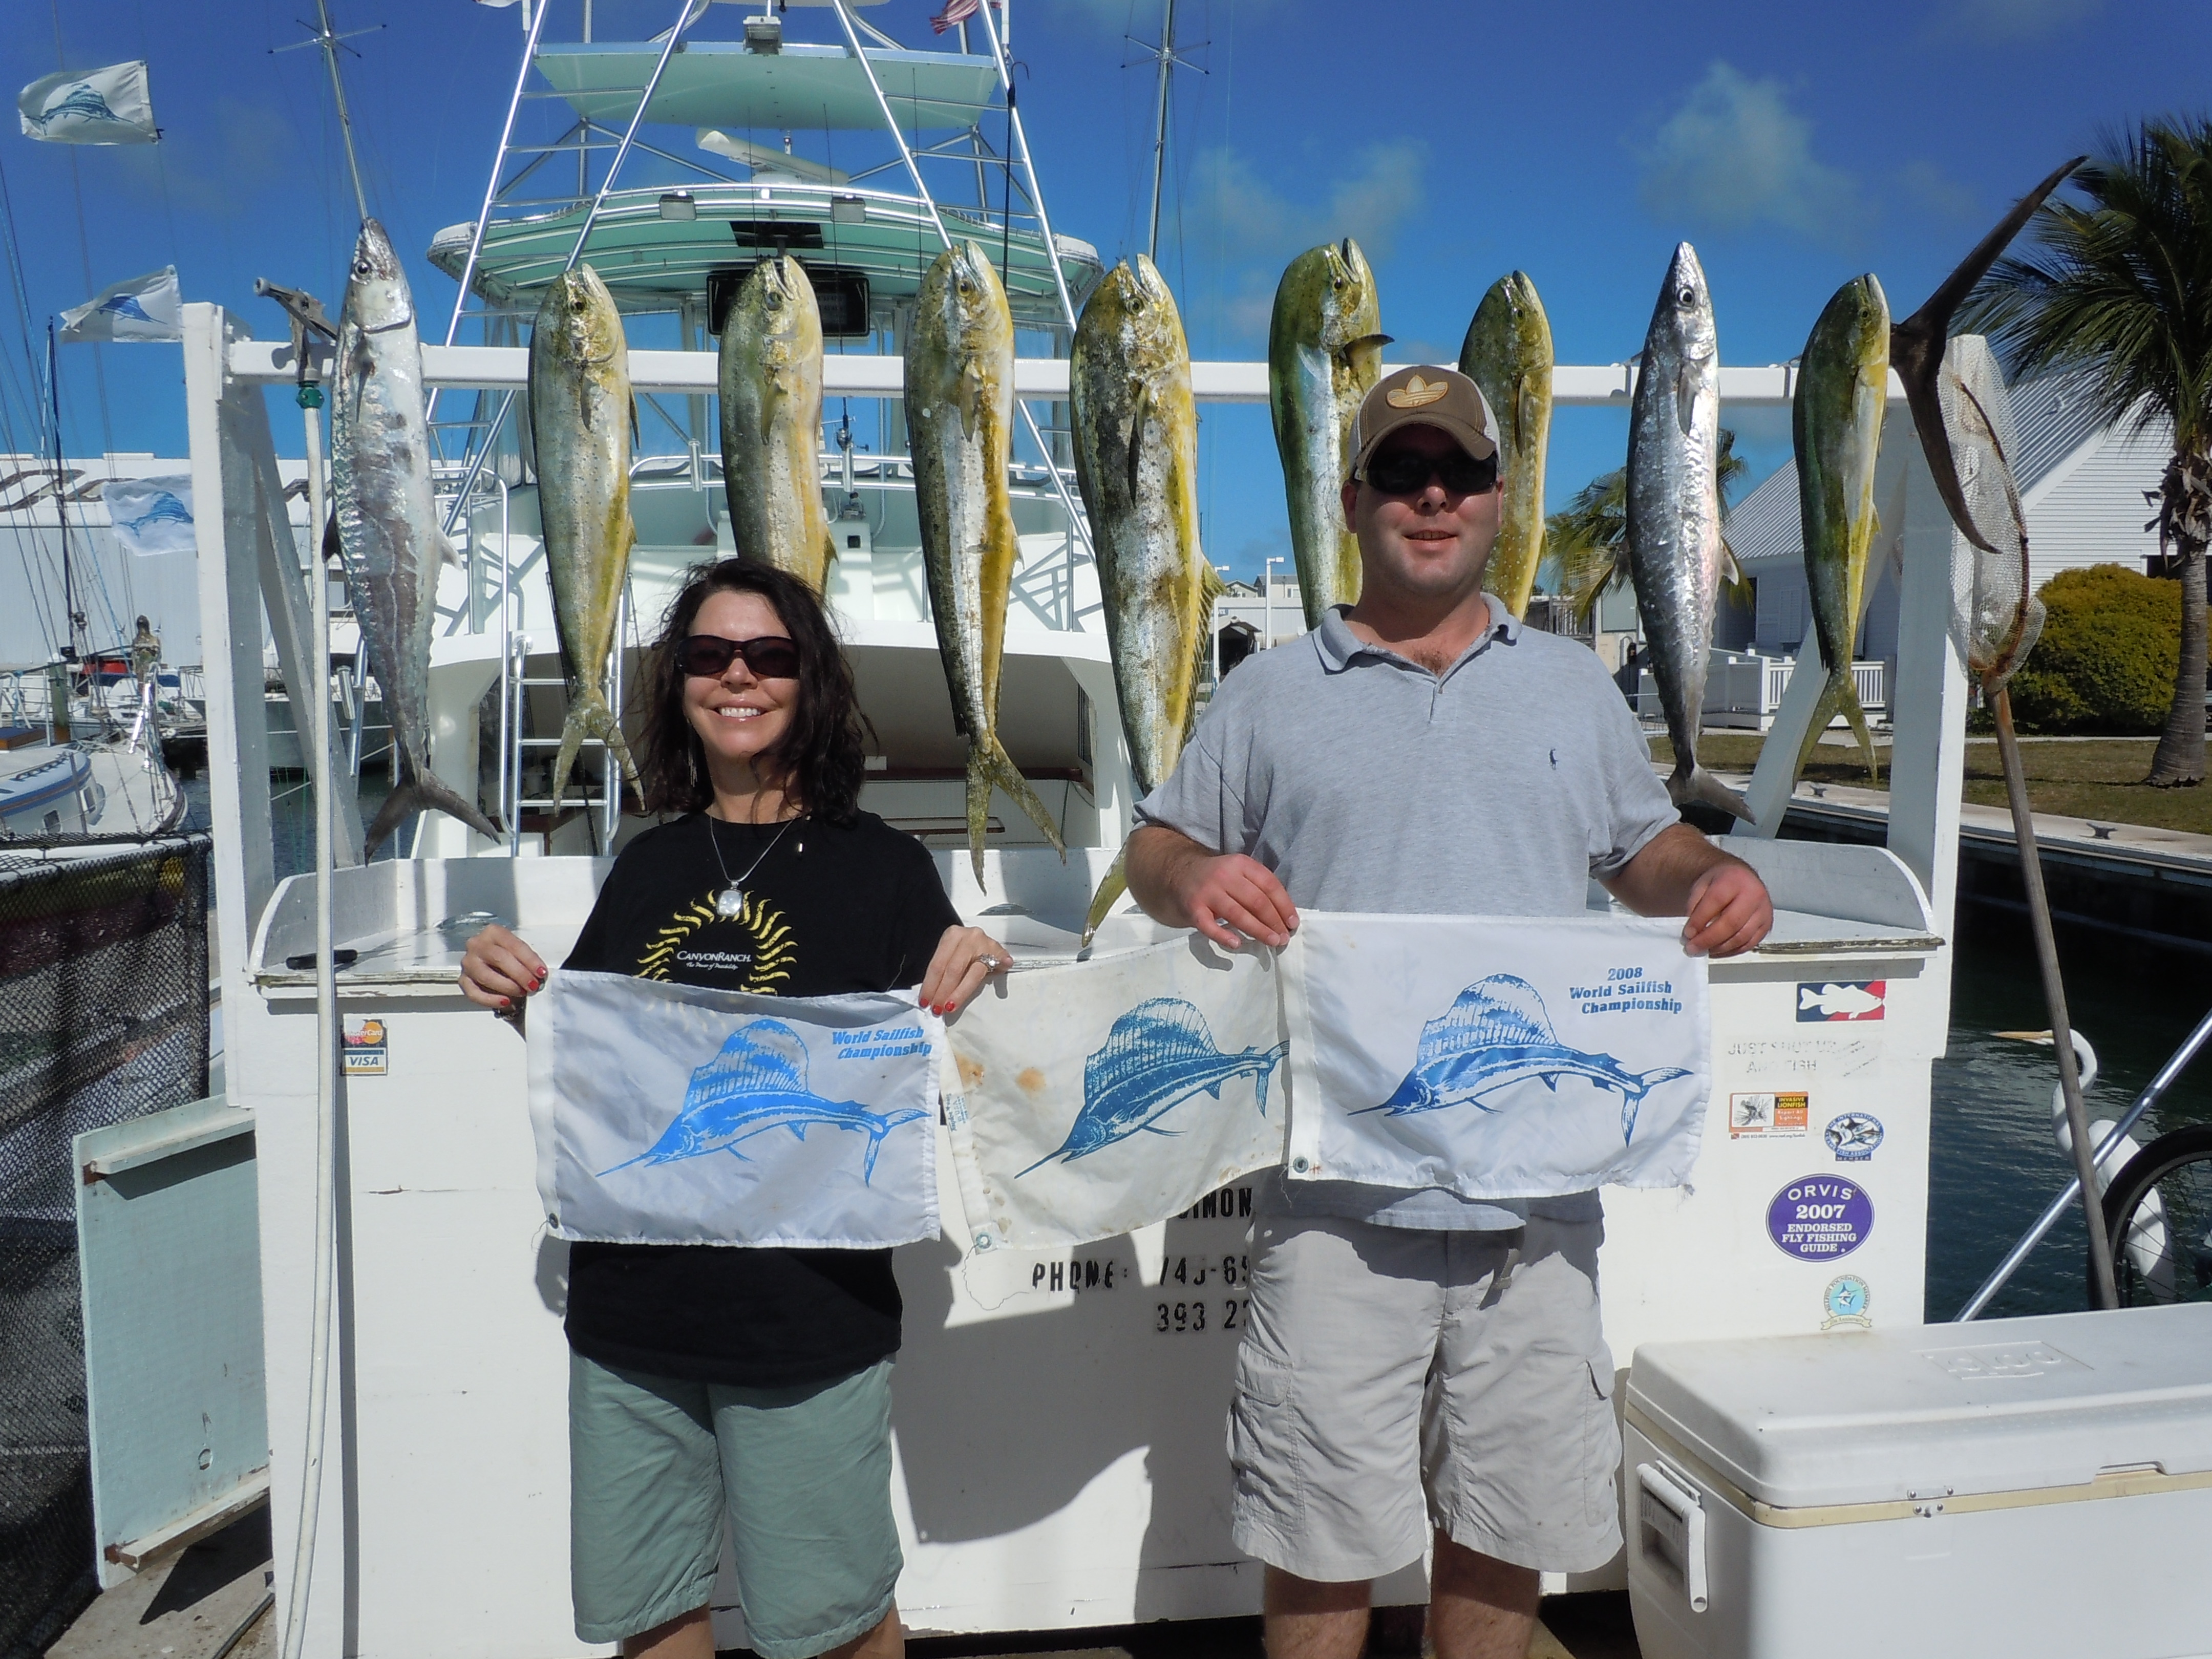 Couple with sailfish 3 catch and release flags and dolphin